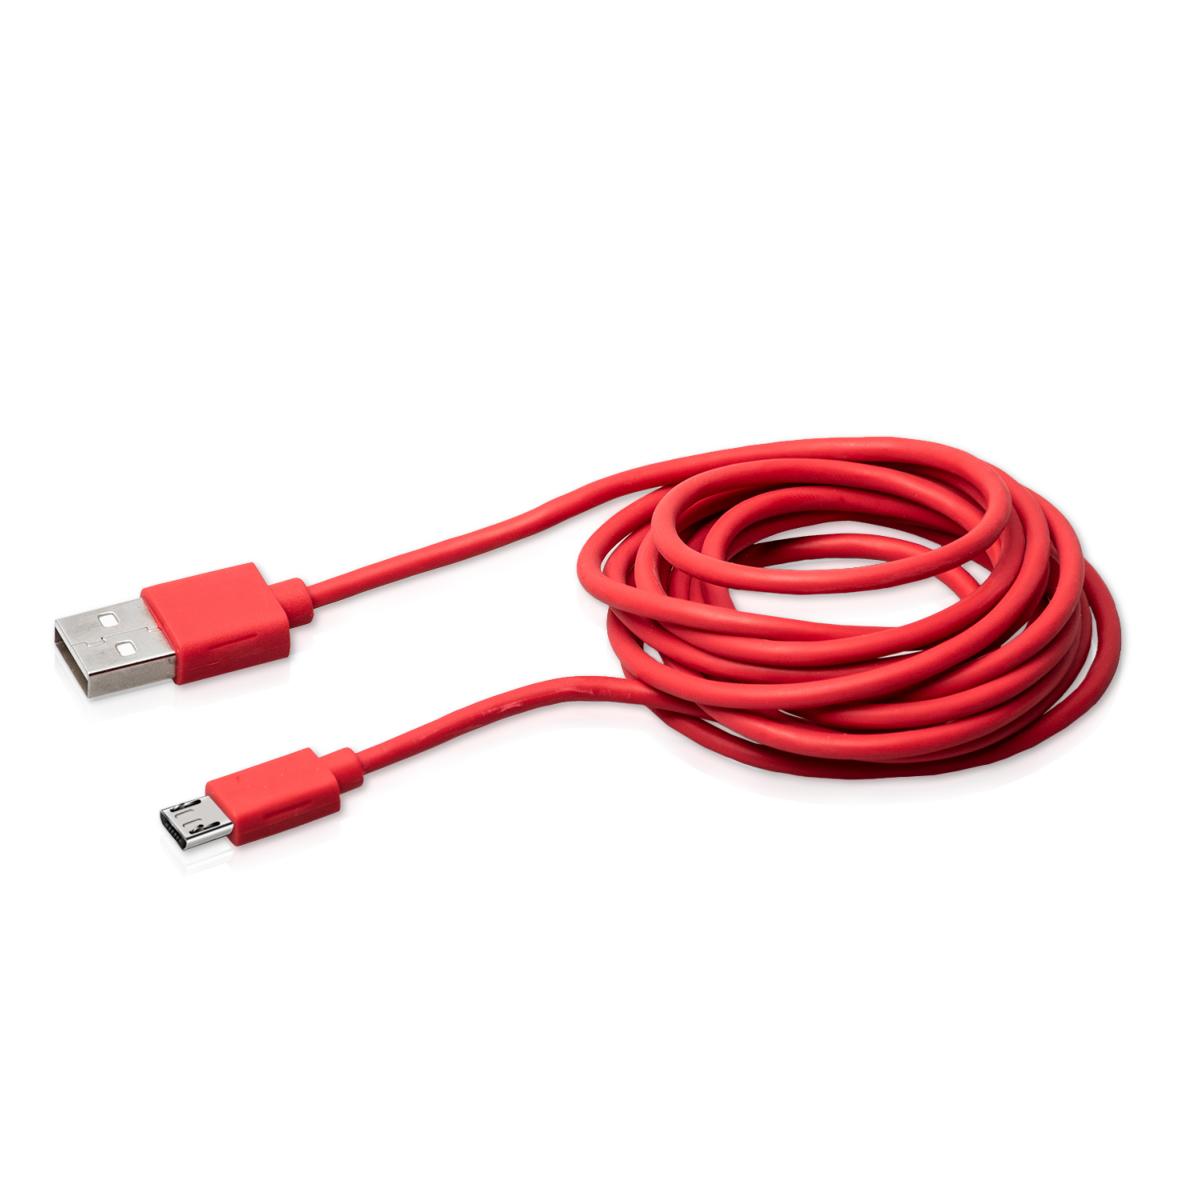 https://www.shop-justforgames.com/Files/85433/Img/09/EvercadeVS-Link-Cable-1500-just-for-games-zoom.jpg